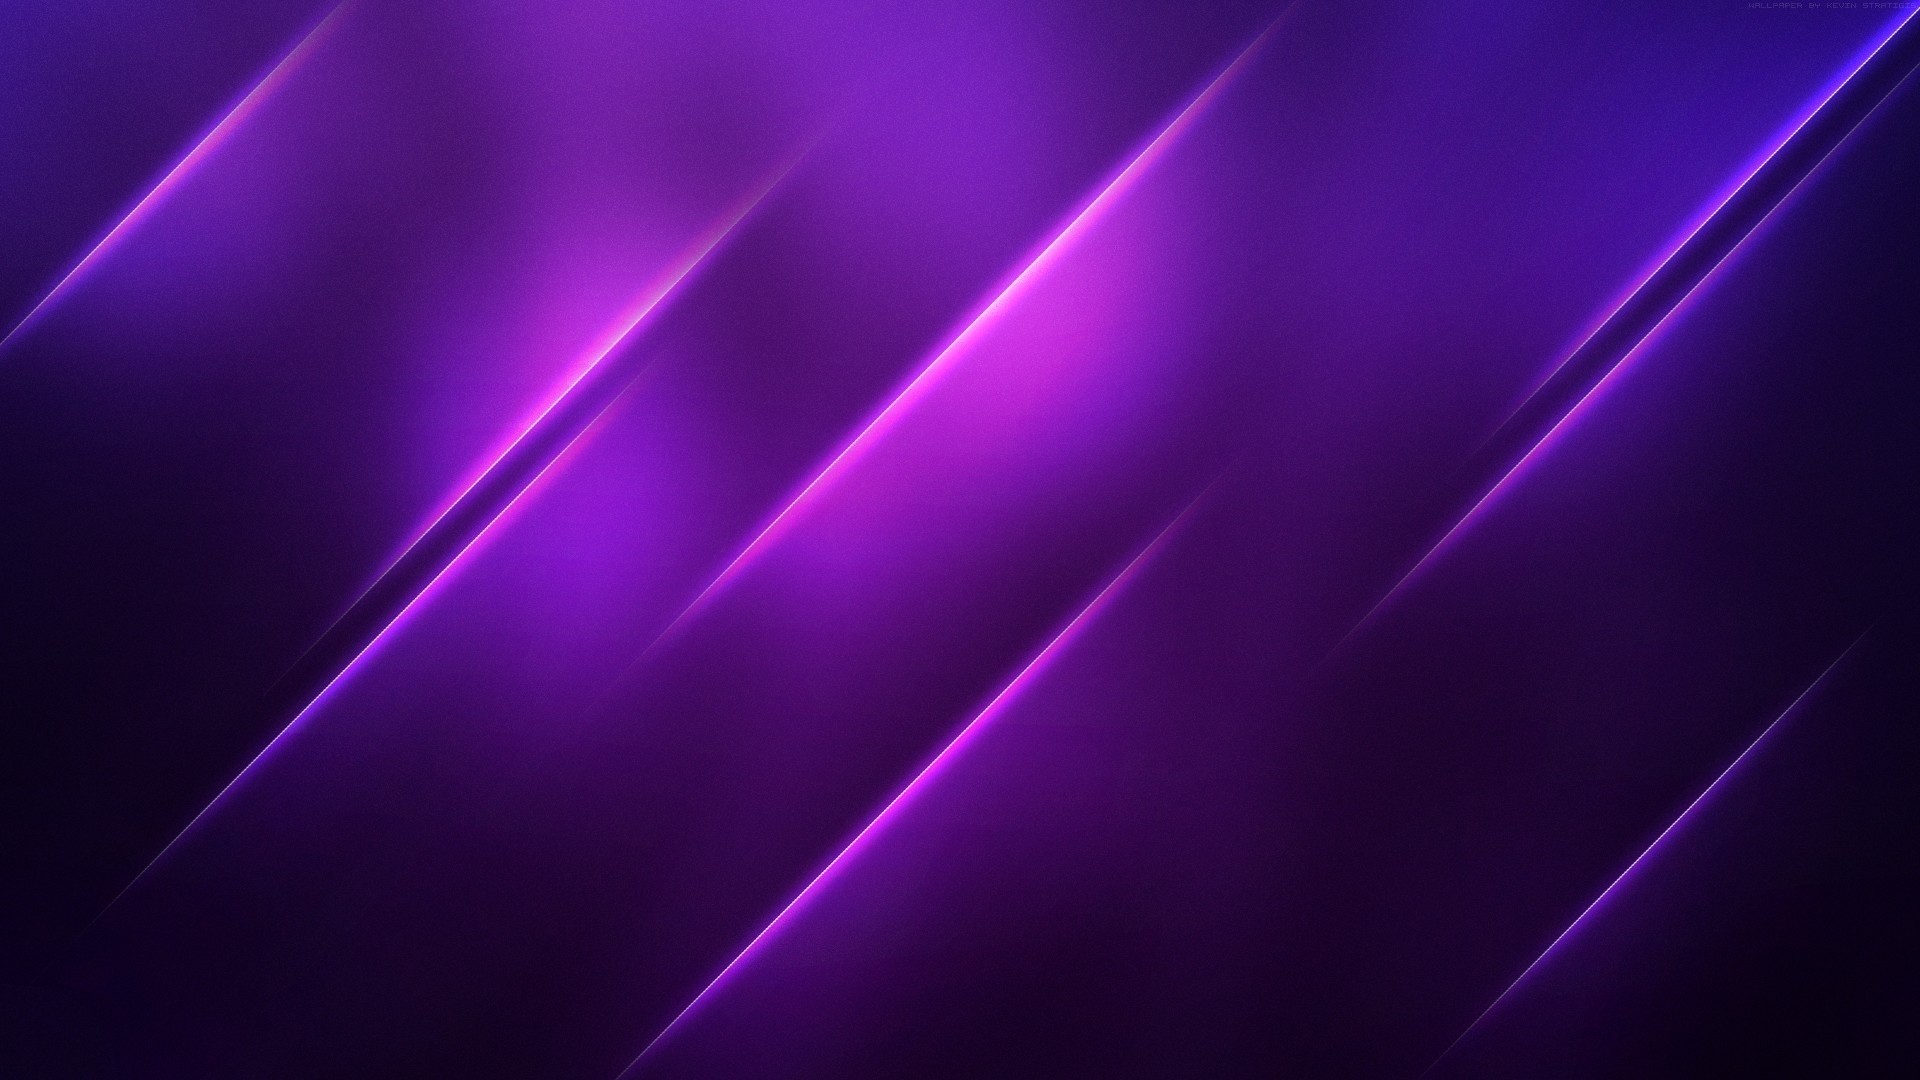 1920x1080 Solid Purple Backgrounds wallpaper Solid Purple Backgrounds hd 